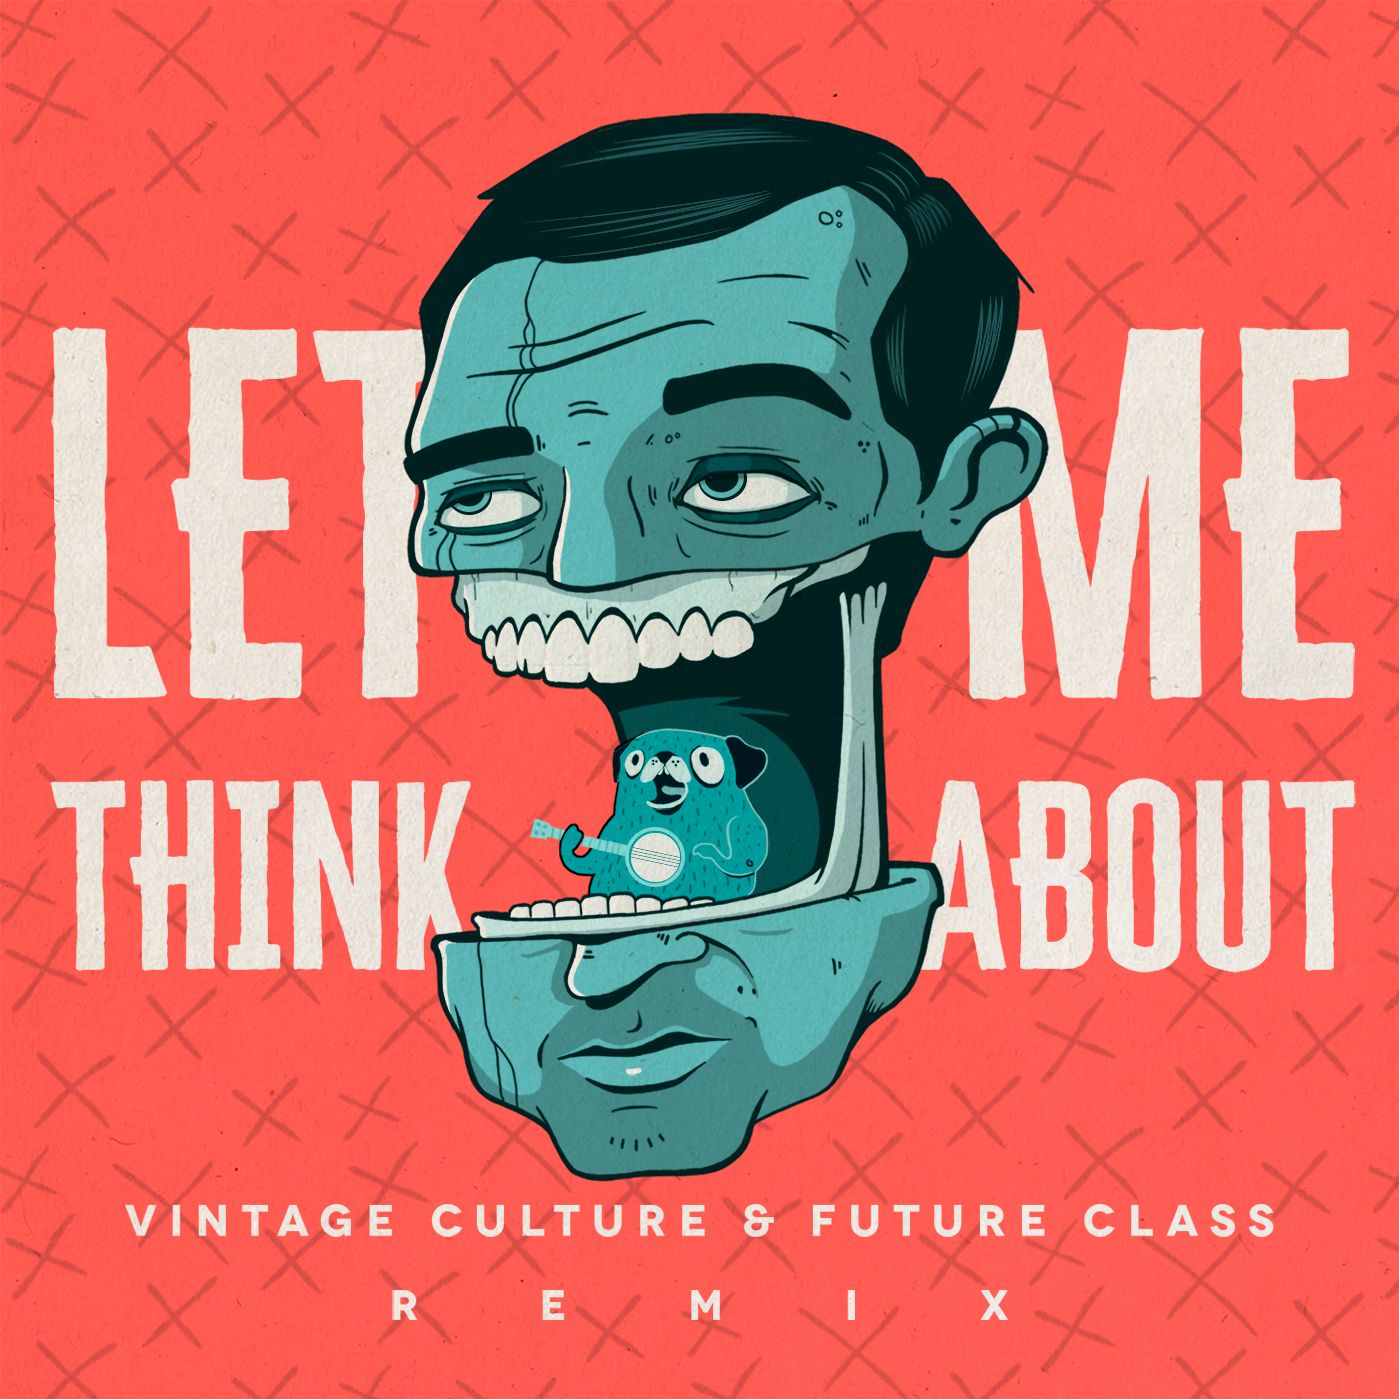 Nedlasting Vintage Culture & Future Class - Let Me Think About